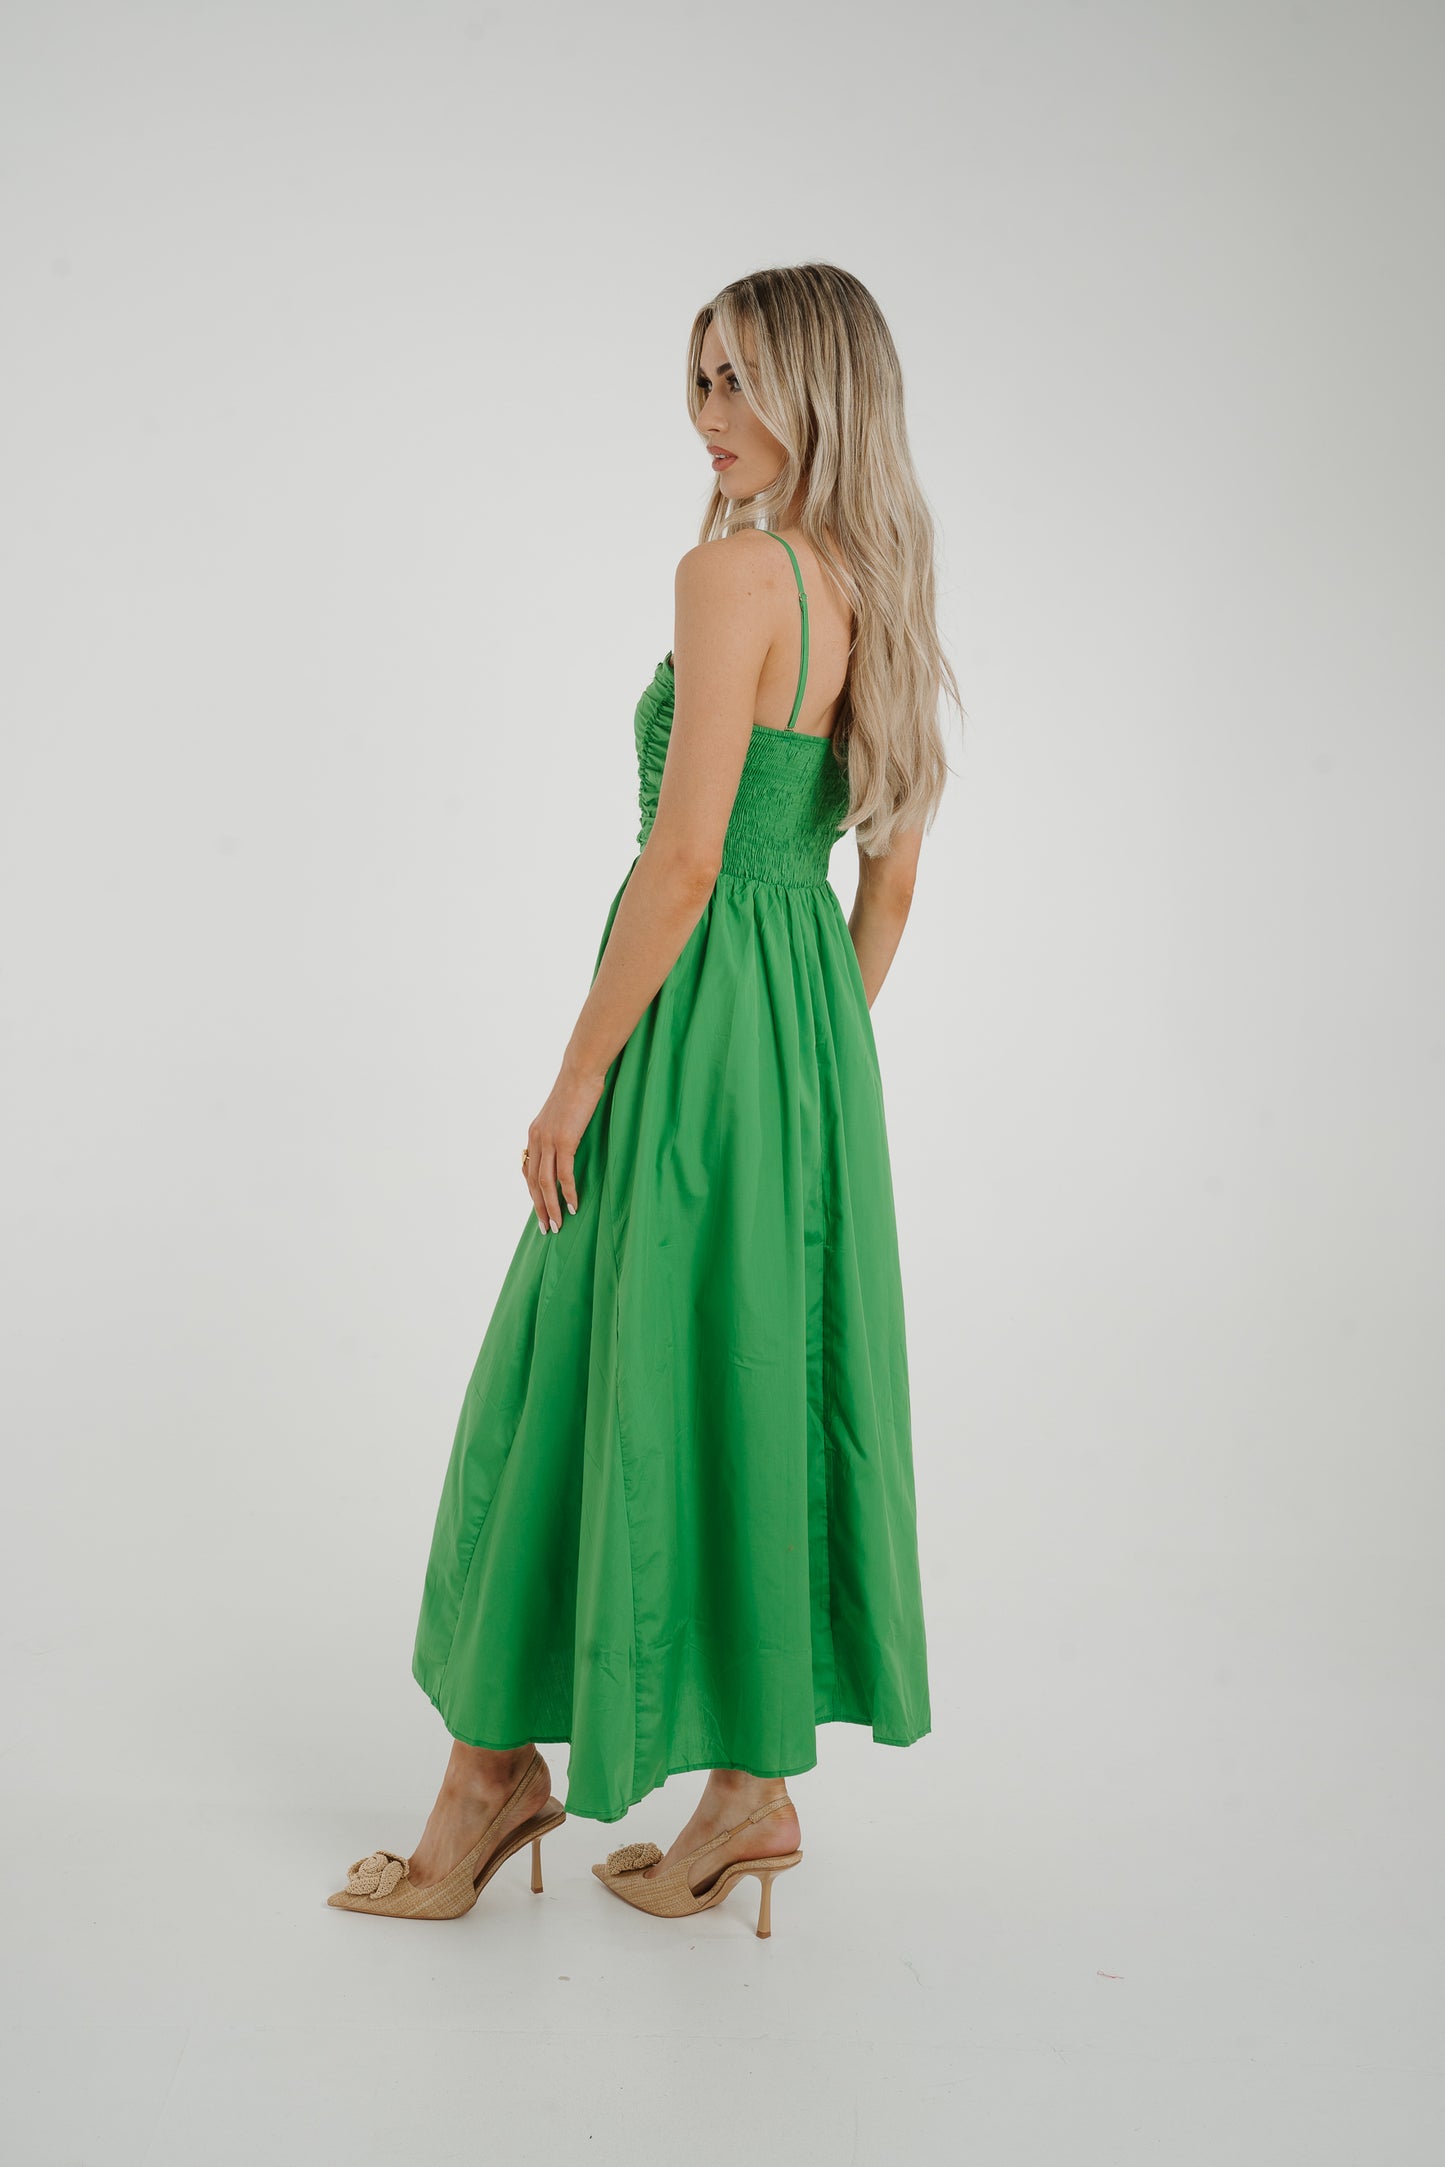 Caitlyn Corset Style Dress In Green